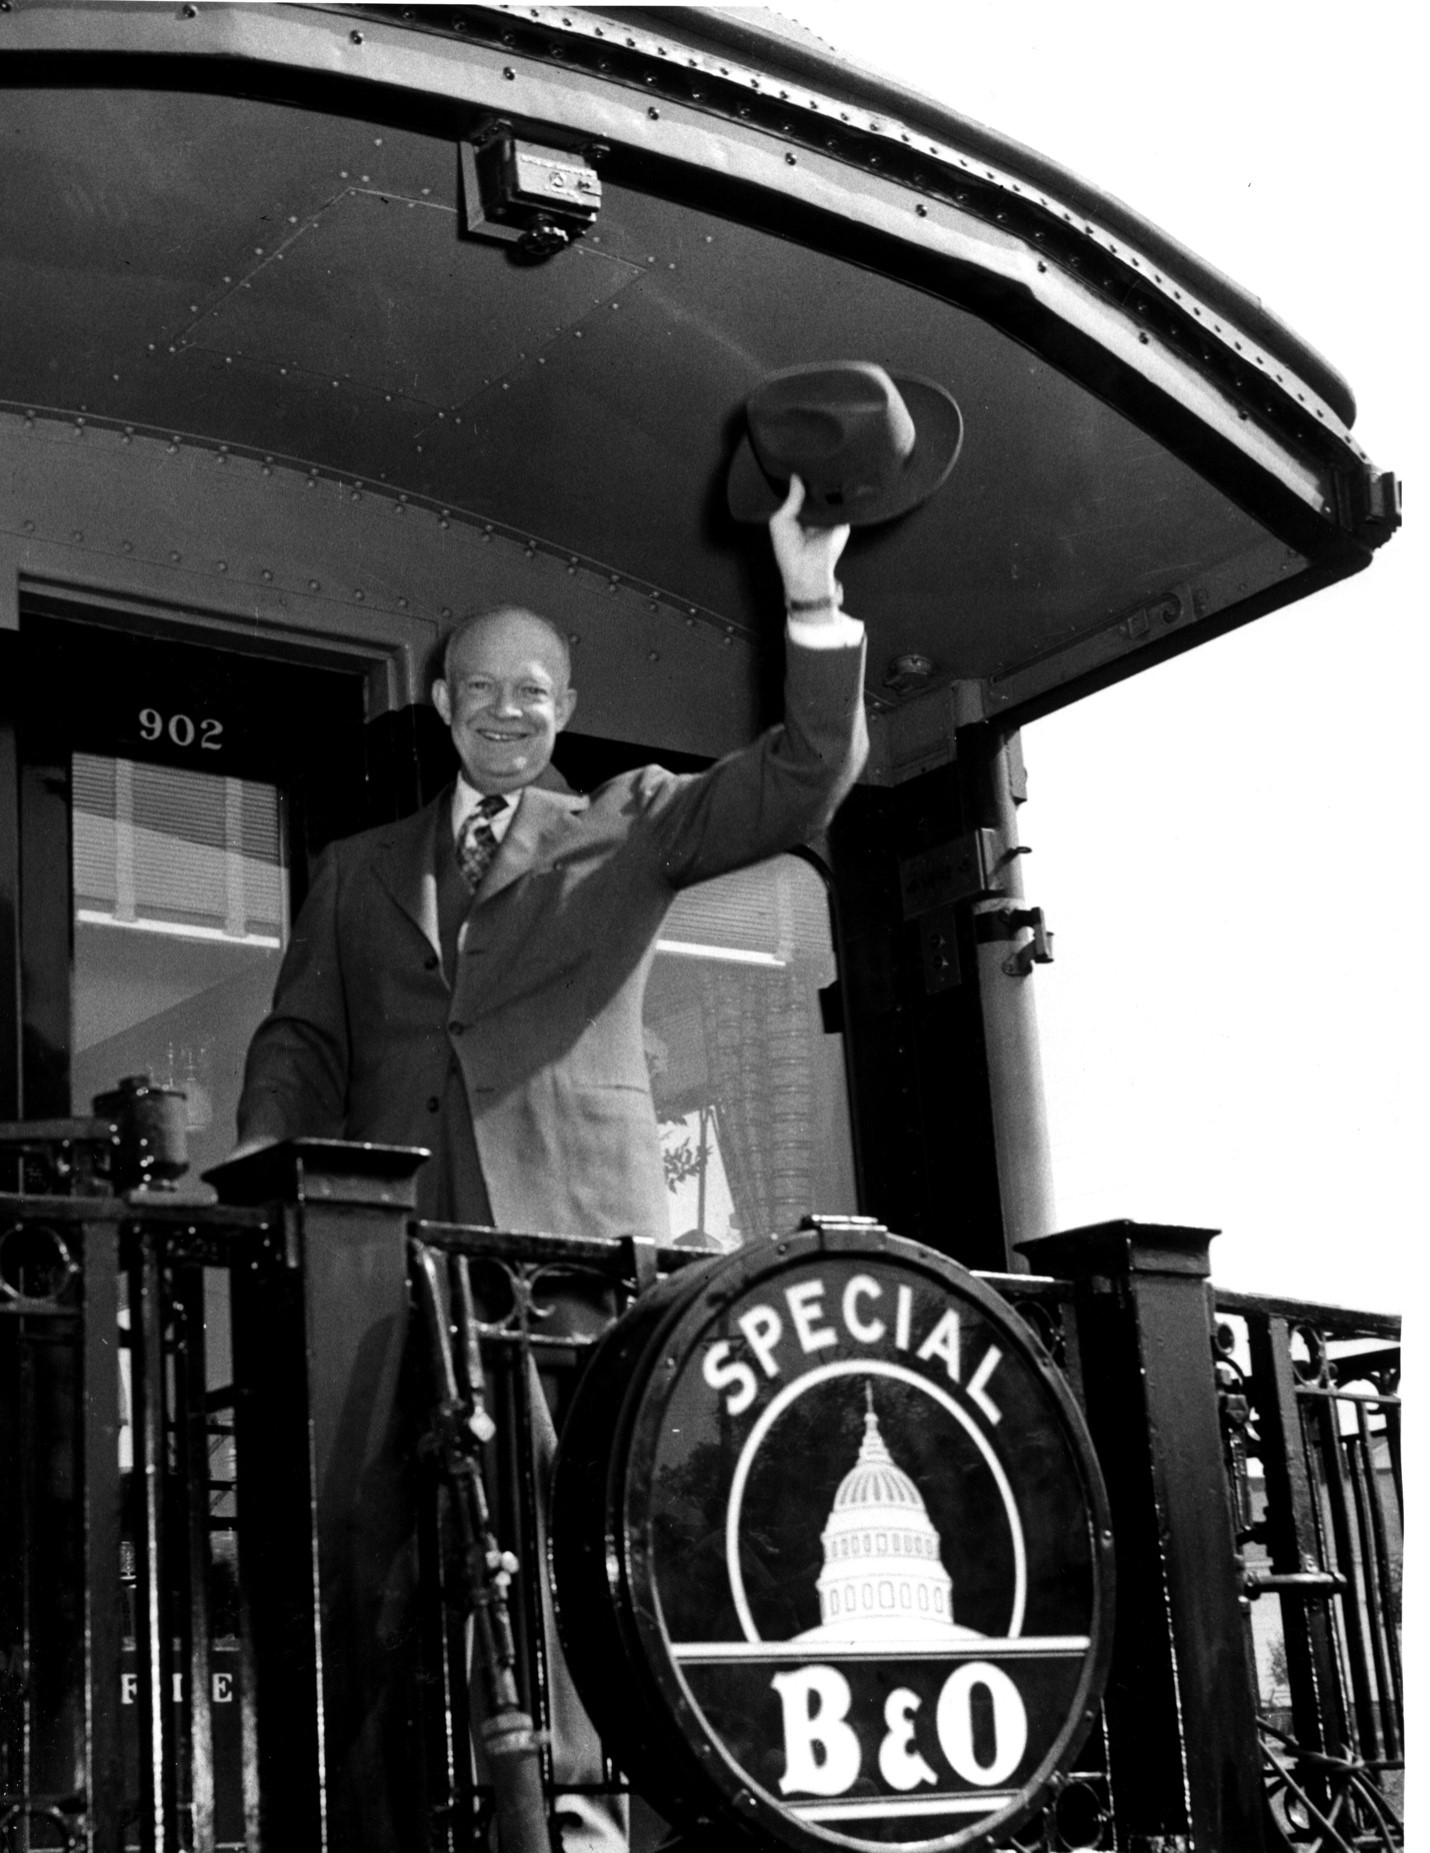 Black and white photograph of a man standing on a train platform and waving his hat.